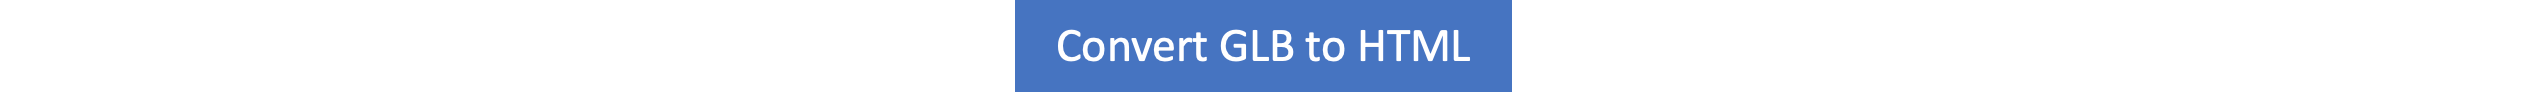 GLB to HTML